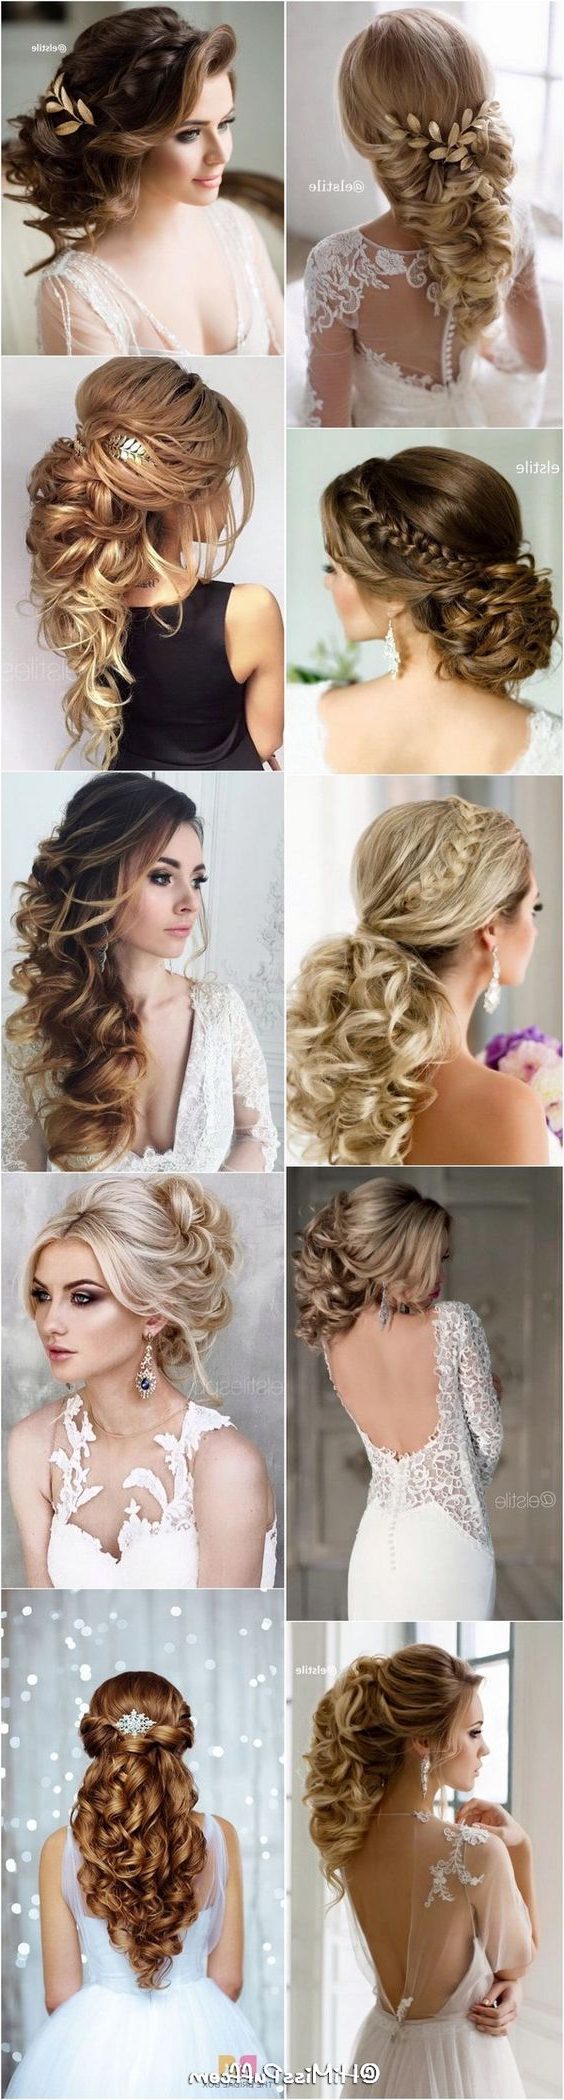 Bridal Wedding Hairstyles for Long Hair That Will Inspire